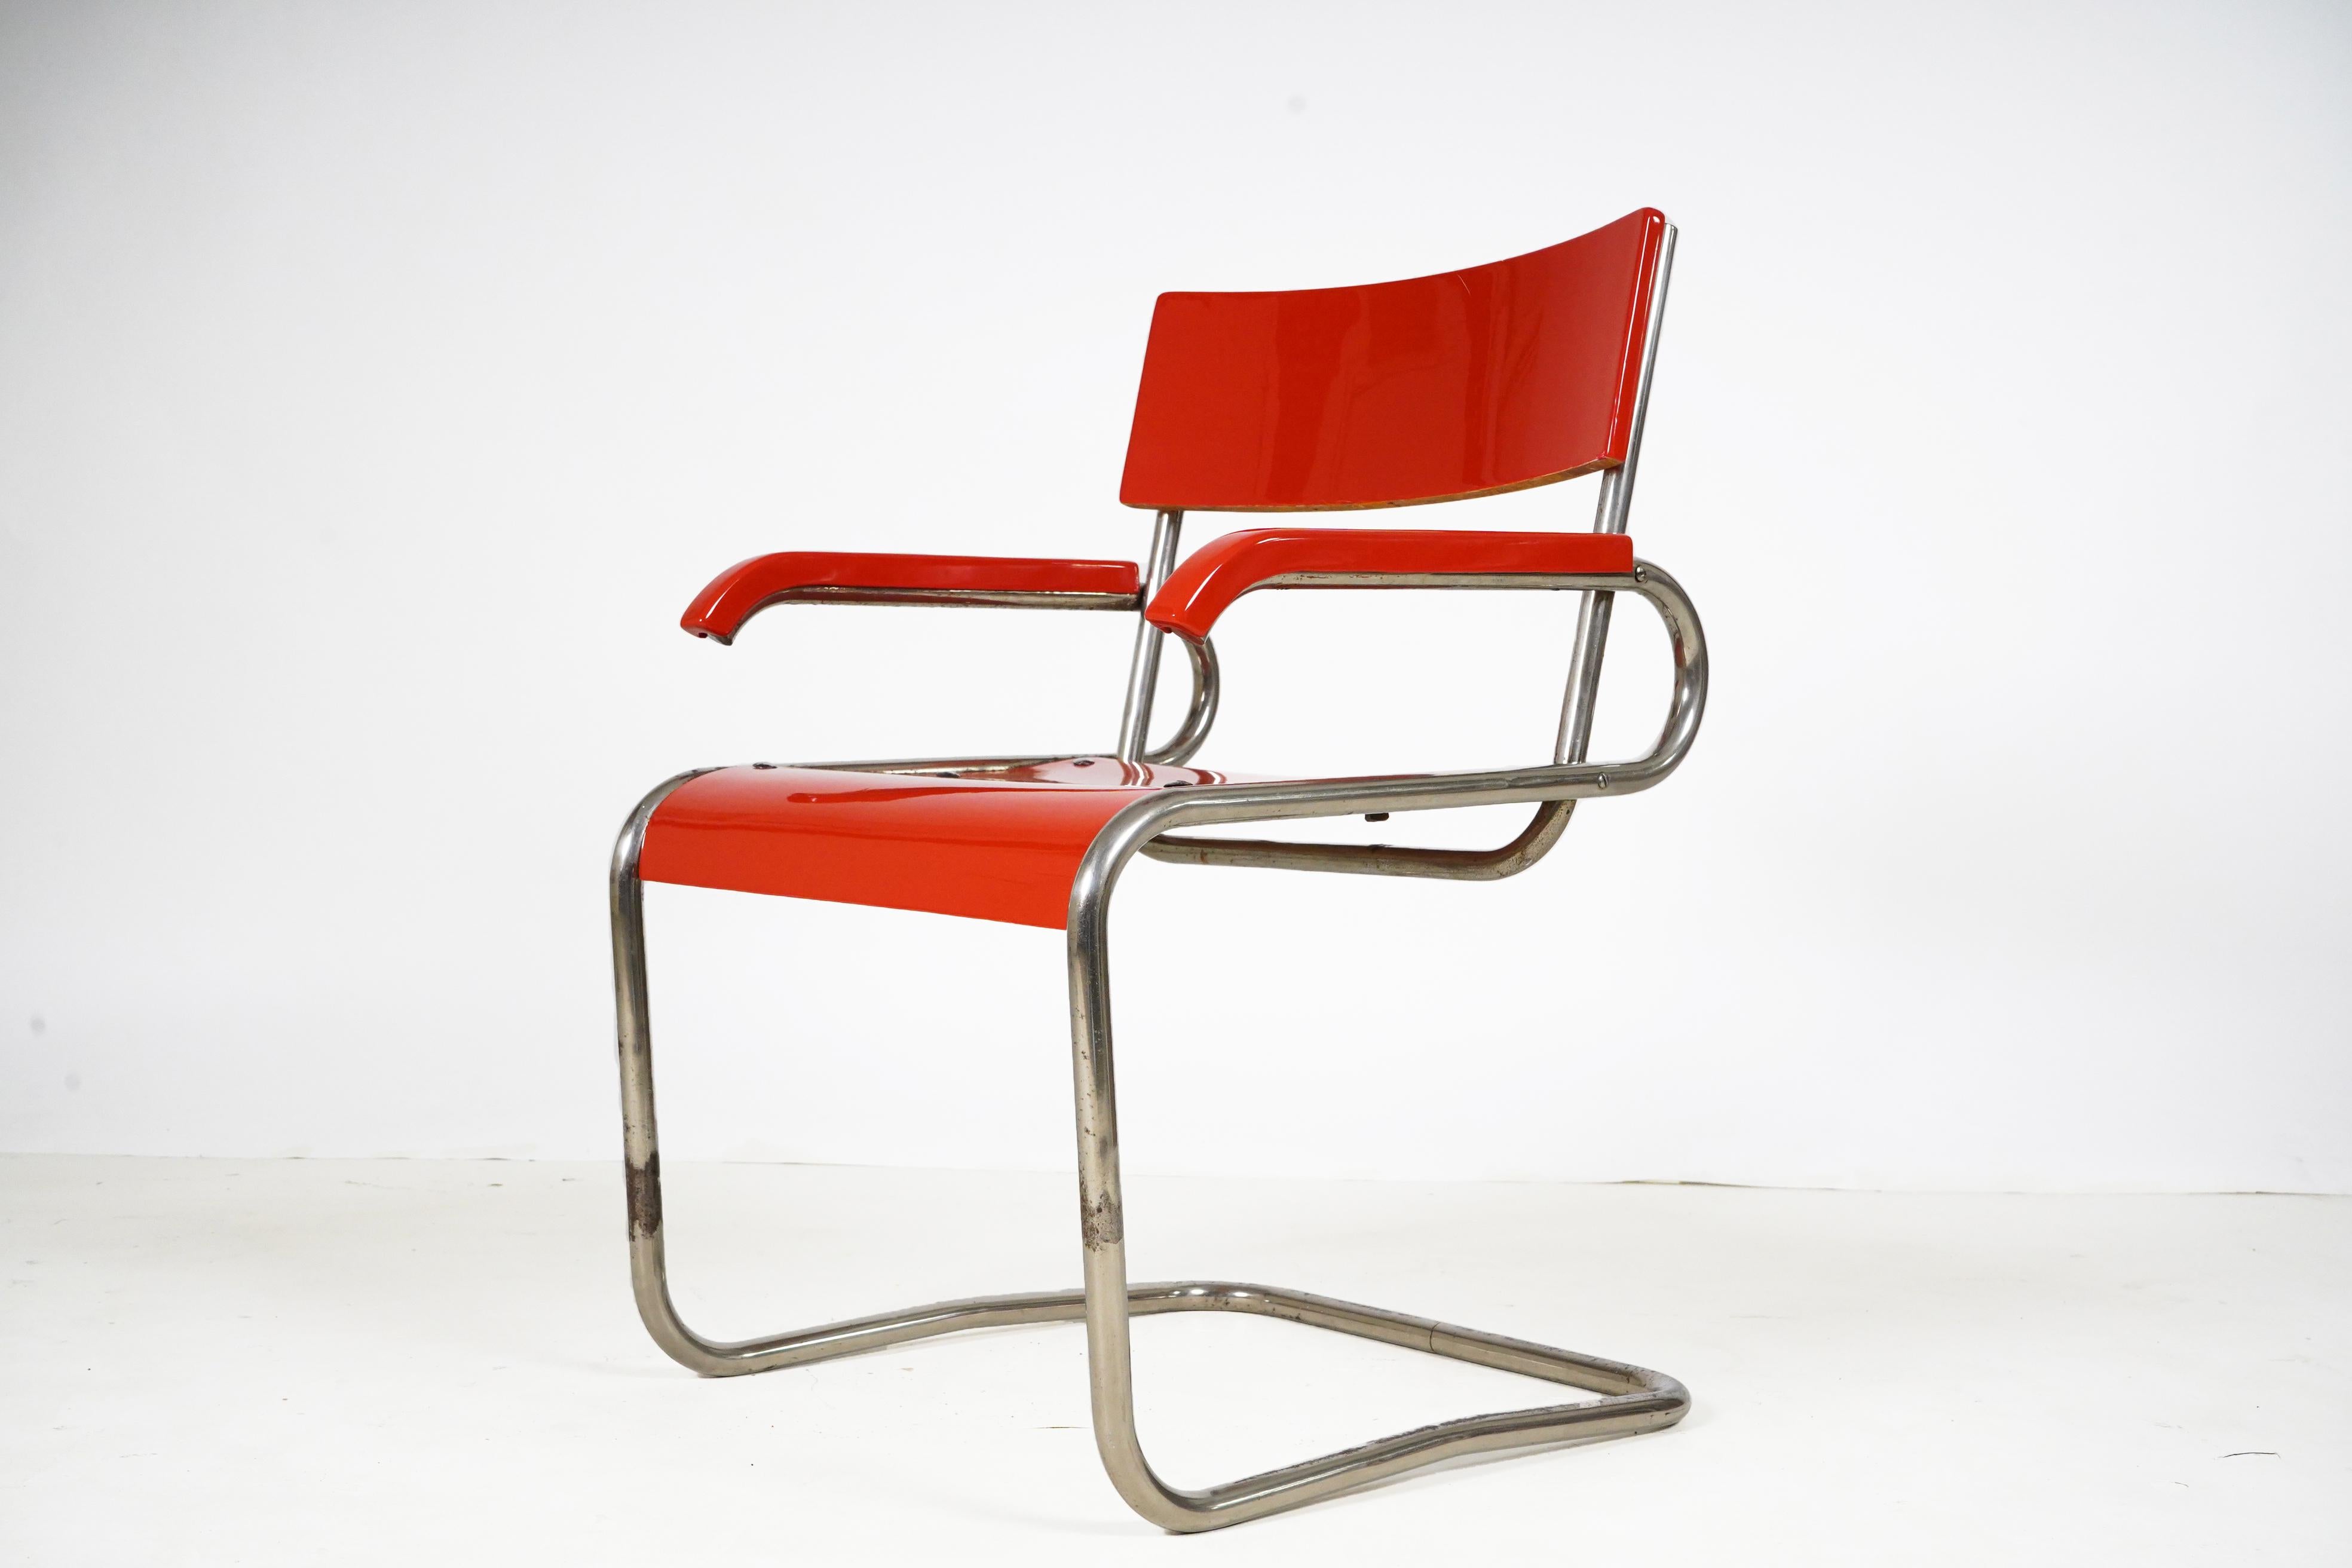 This Bauhaus-inspired Czech chair was once used in a modern office in Prague. During the 1930's, Czech artists, writers and furniture makers were inspired by modernist theories and experimented with new designs of every kind. The Bauhaus school in